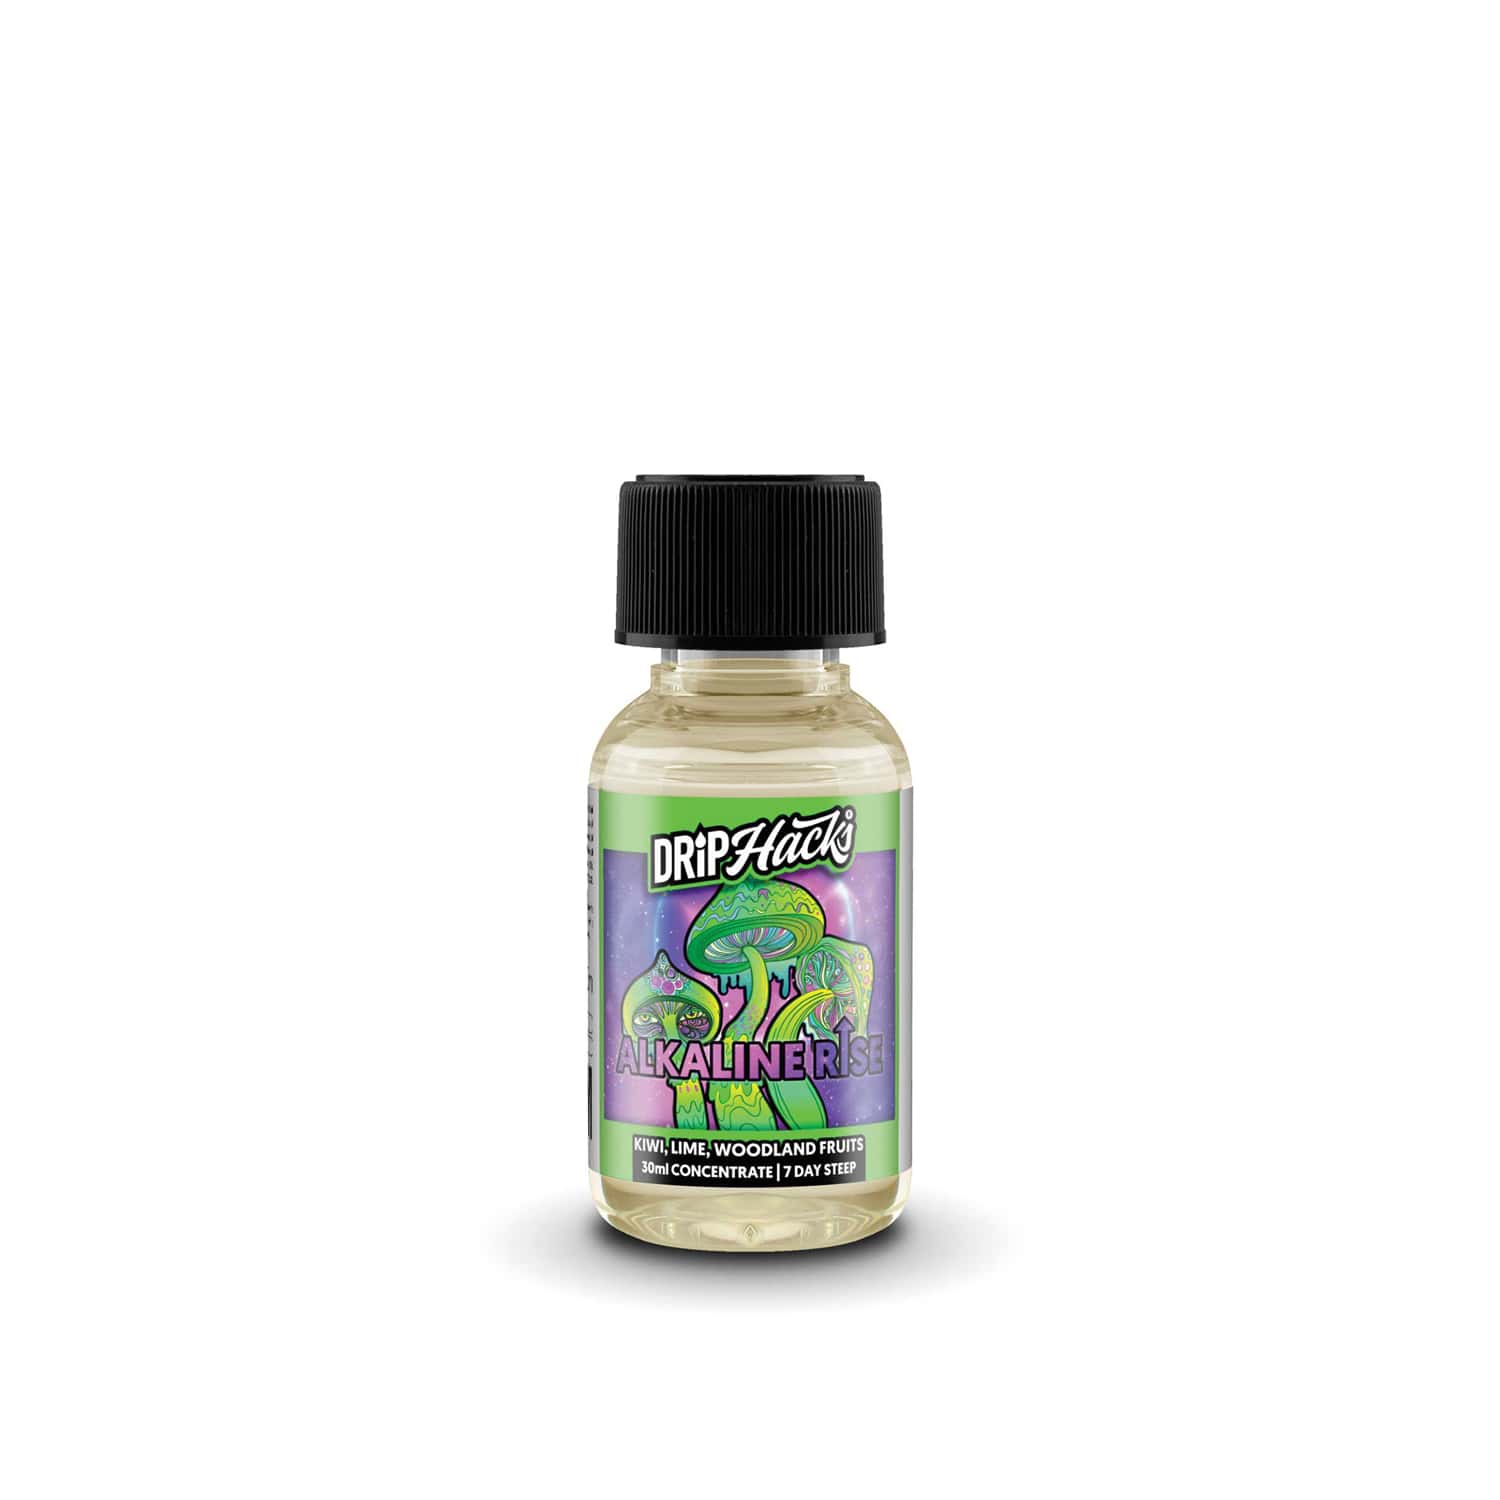 Alkaline Rise Flavour Concentrate by Drip Hacks